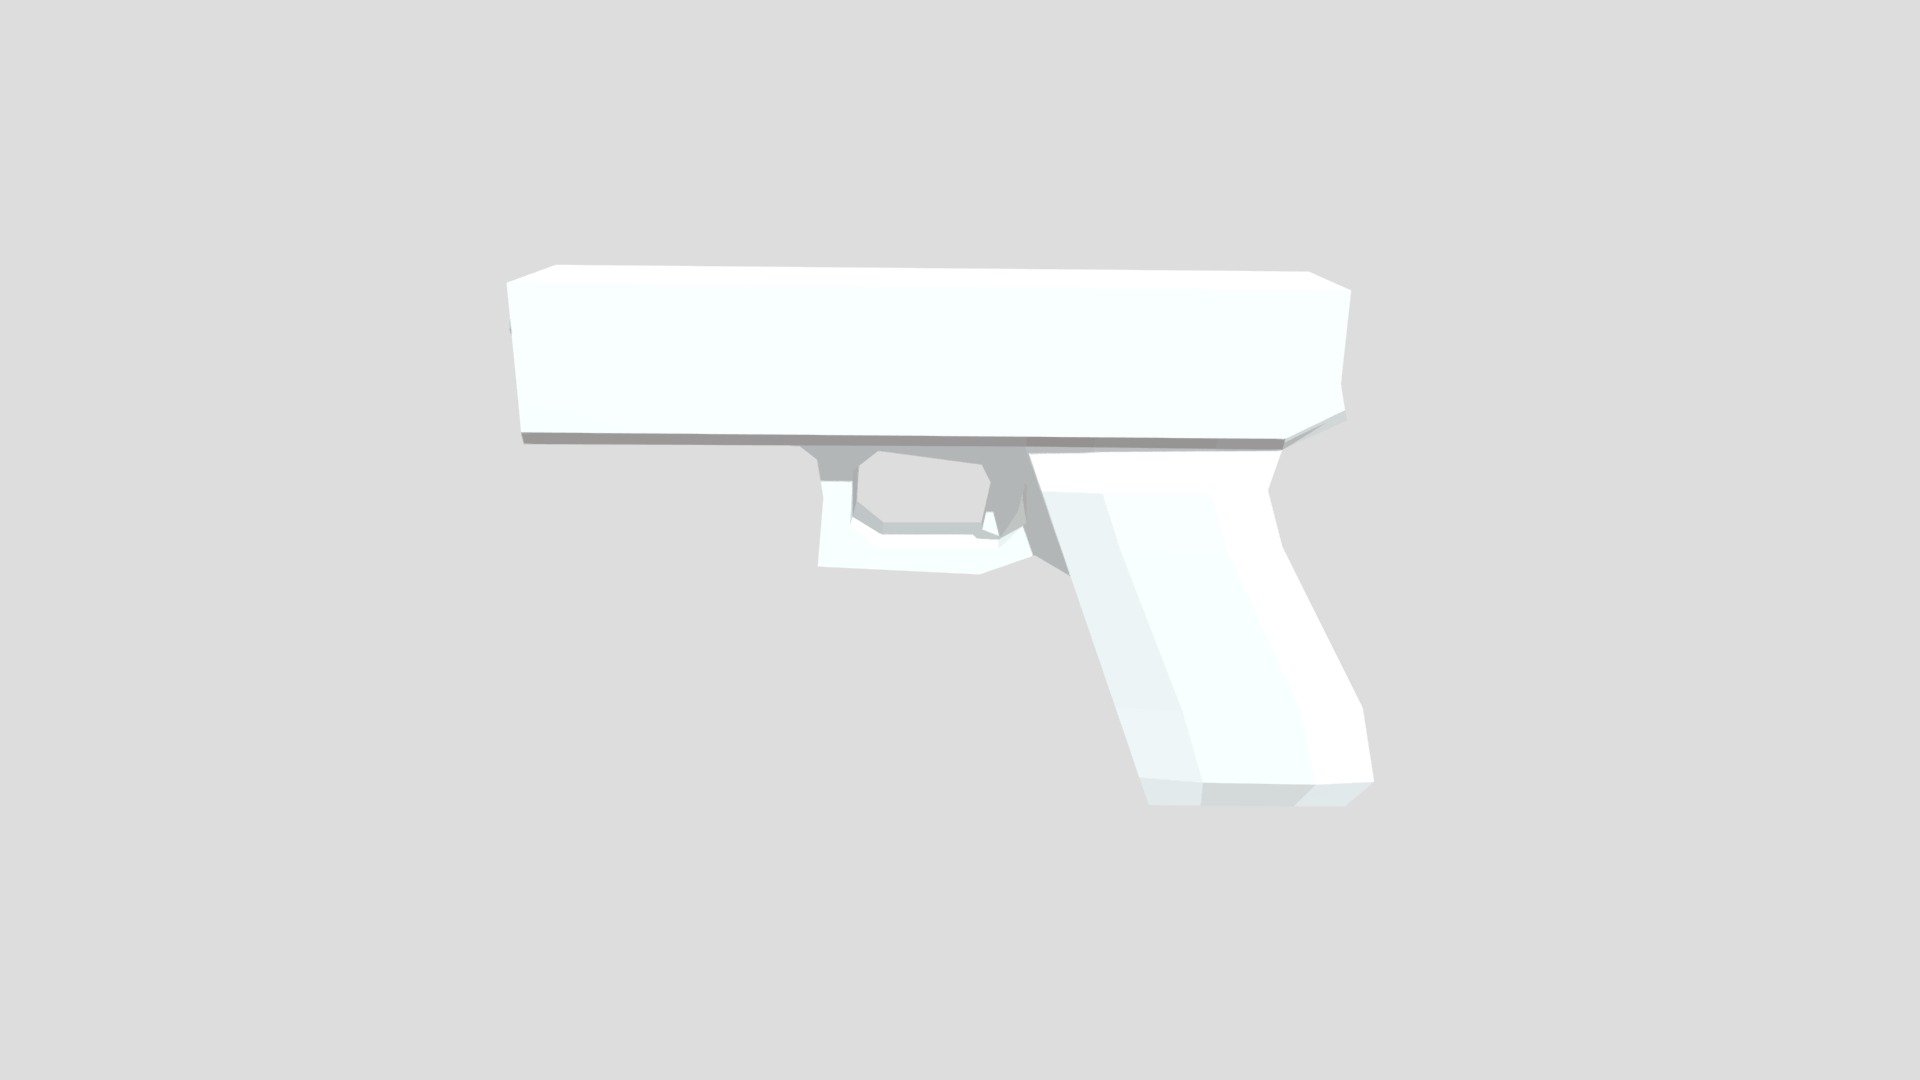 Low Poly G17